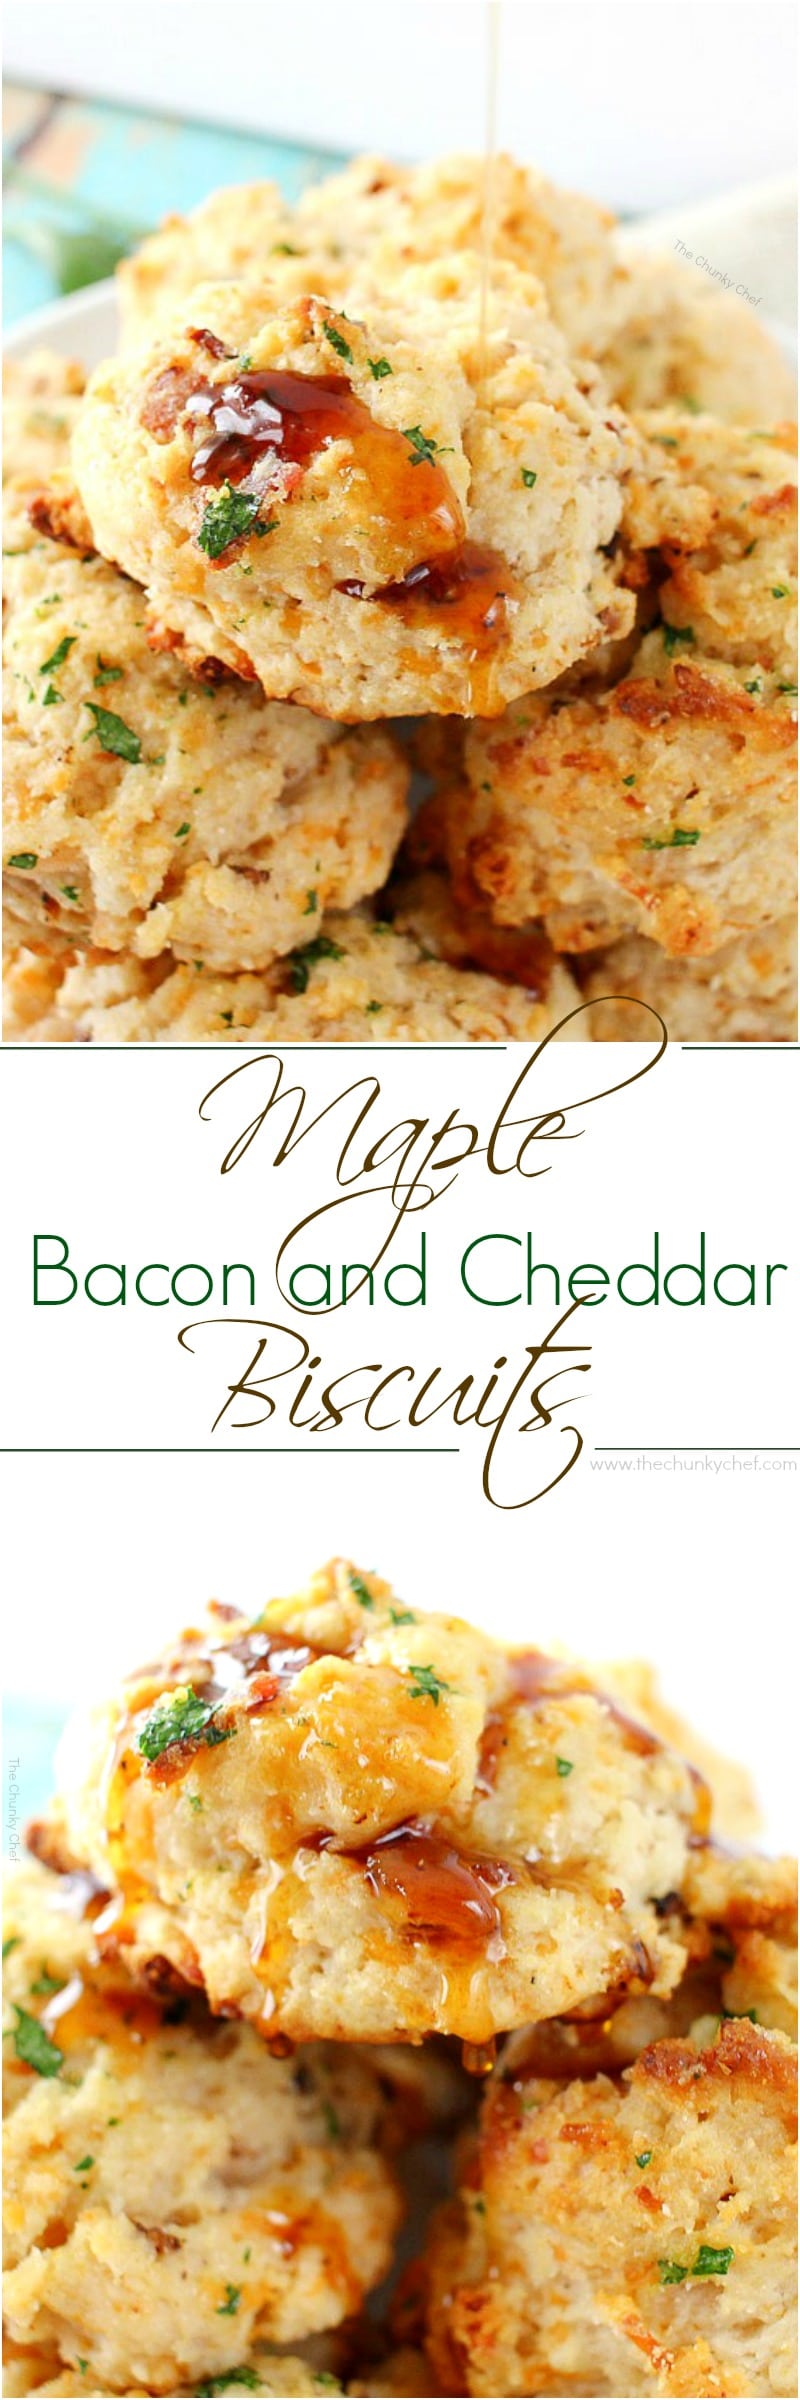 Fluffy buttermilk biscuits that are both savory and sweet... flavored with cheddar cheese, crispy bacon and maple syrup, then brushed with melted butter!